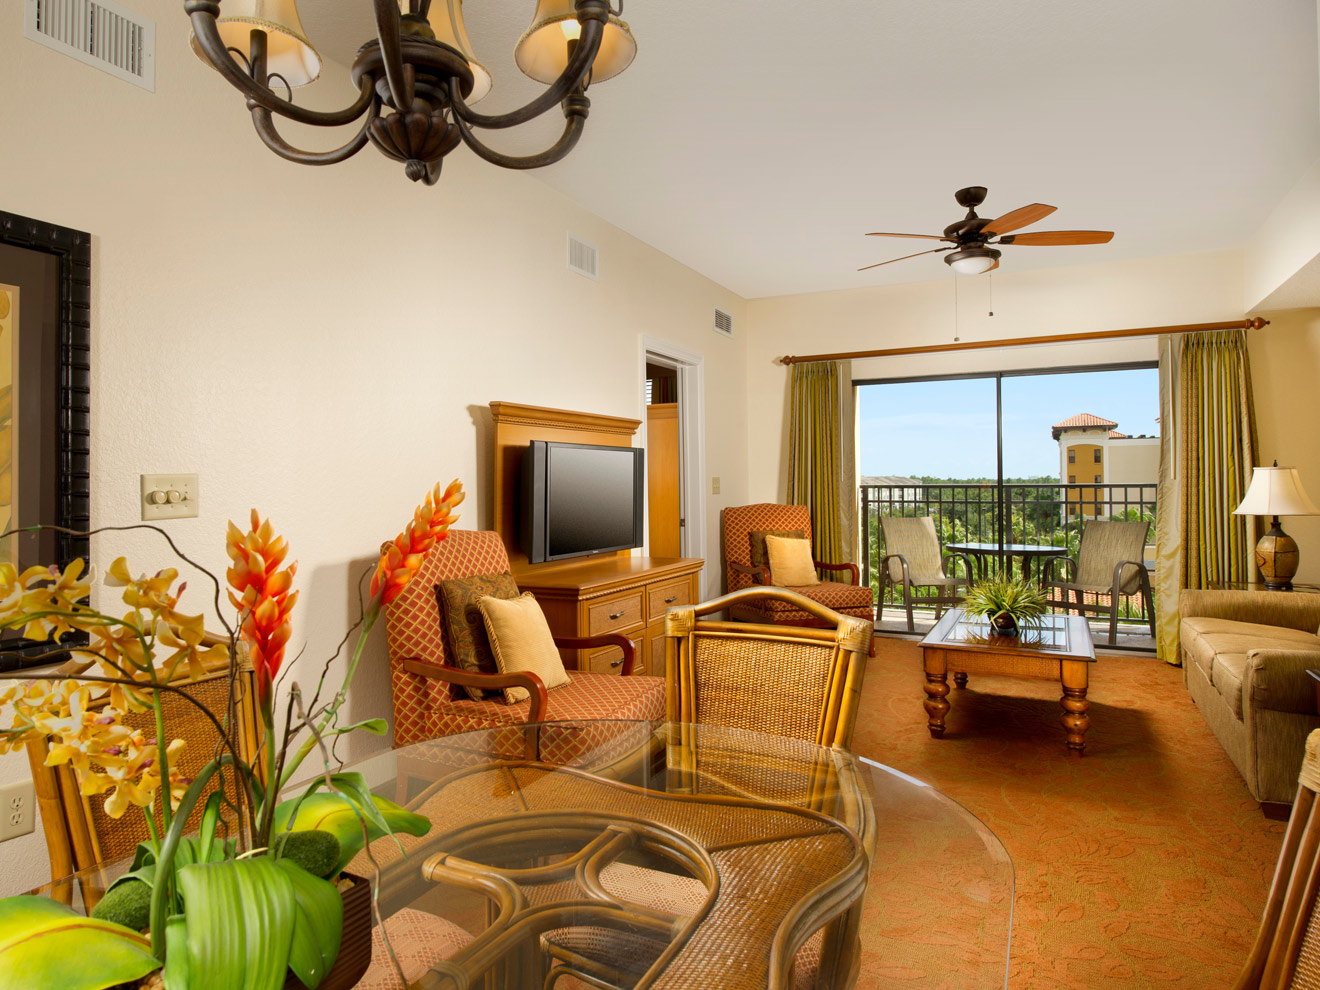 Floridays Resort Orlando Has The Comforts Of Home Family